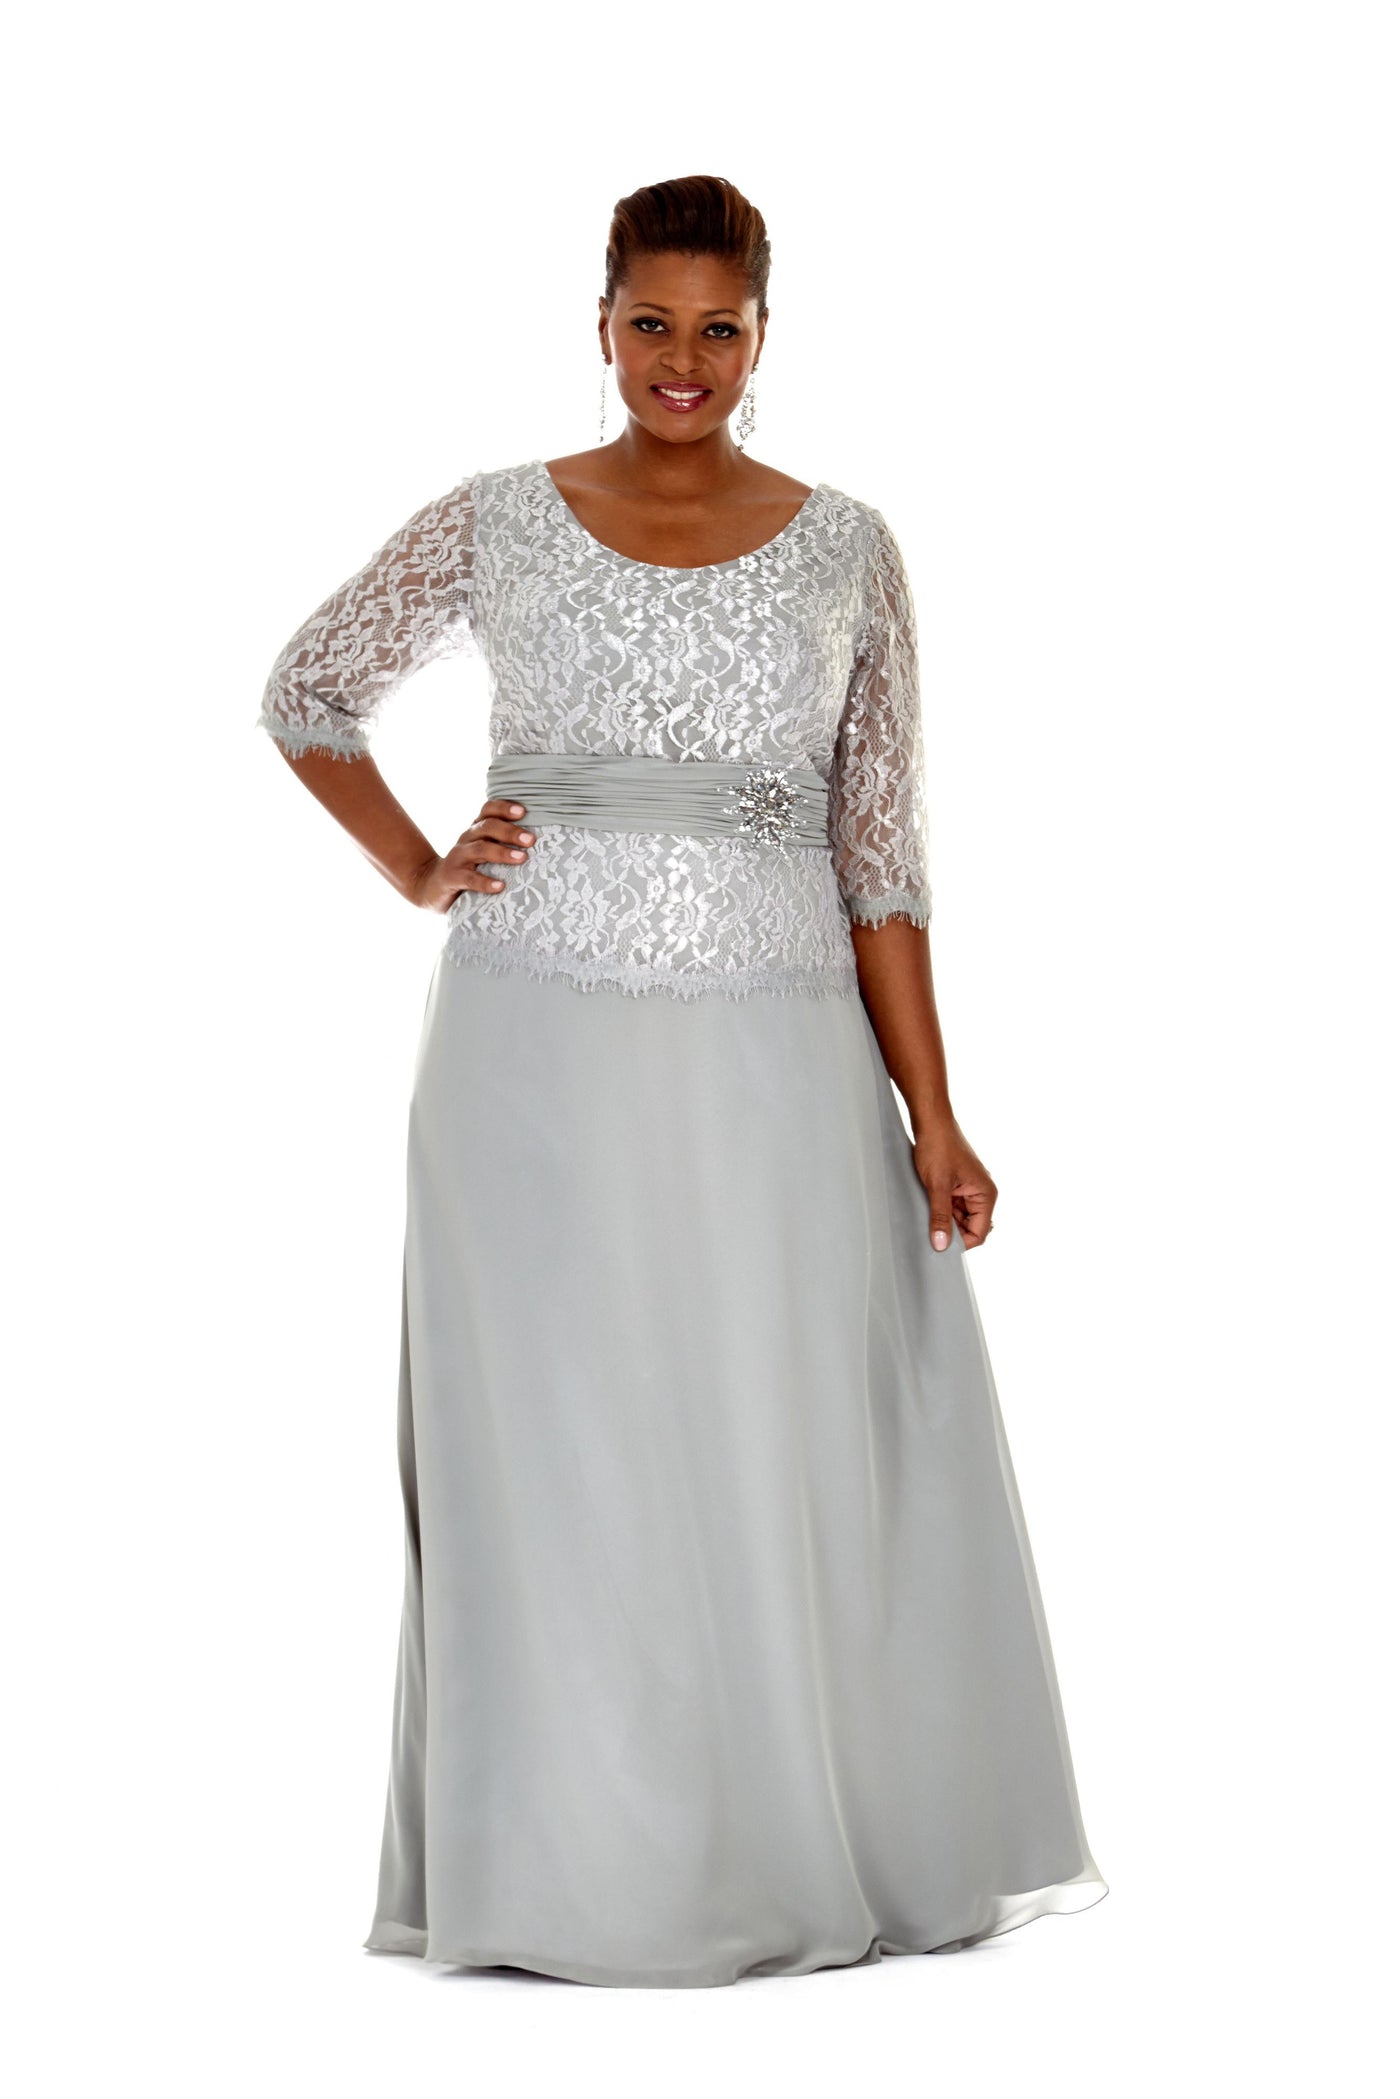 Vintage Style Mother of the Bride Evening Gown by Sydney's Closet - SOLD OUT